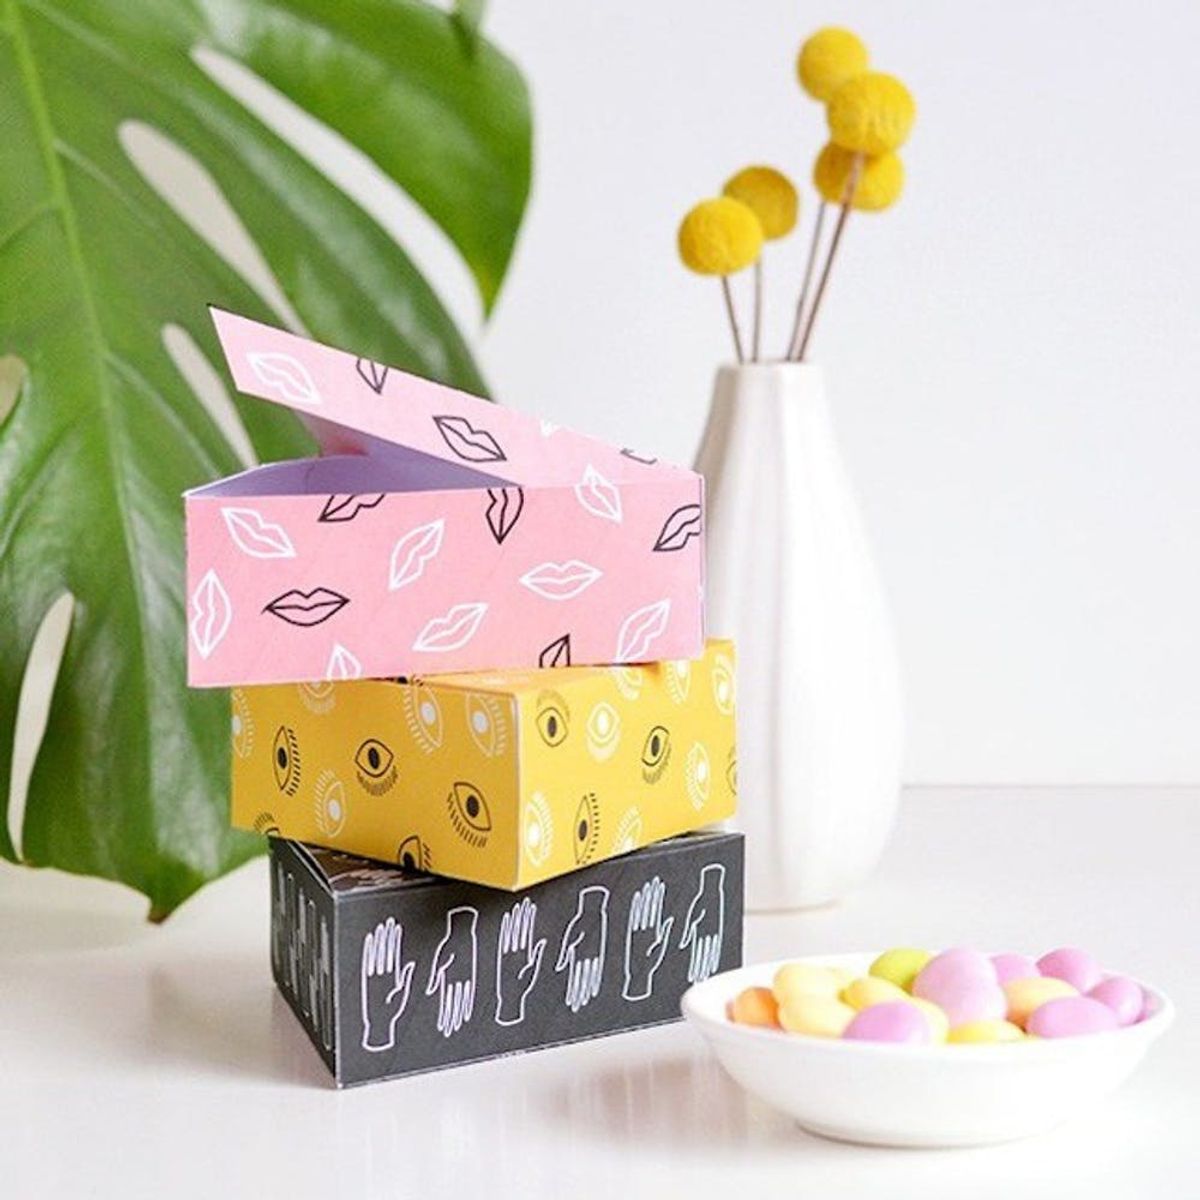 10 Printable Gift Boxes for When You’re Out of Wrapping Paper